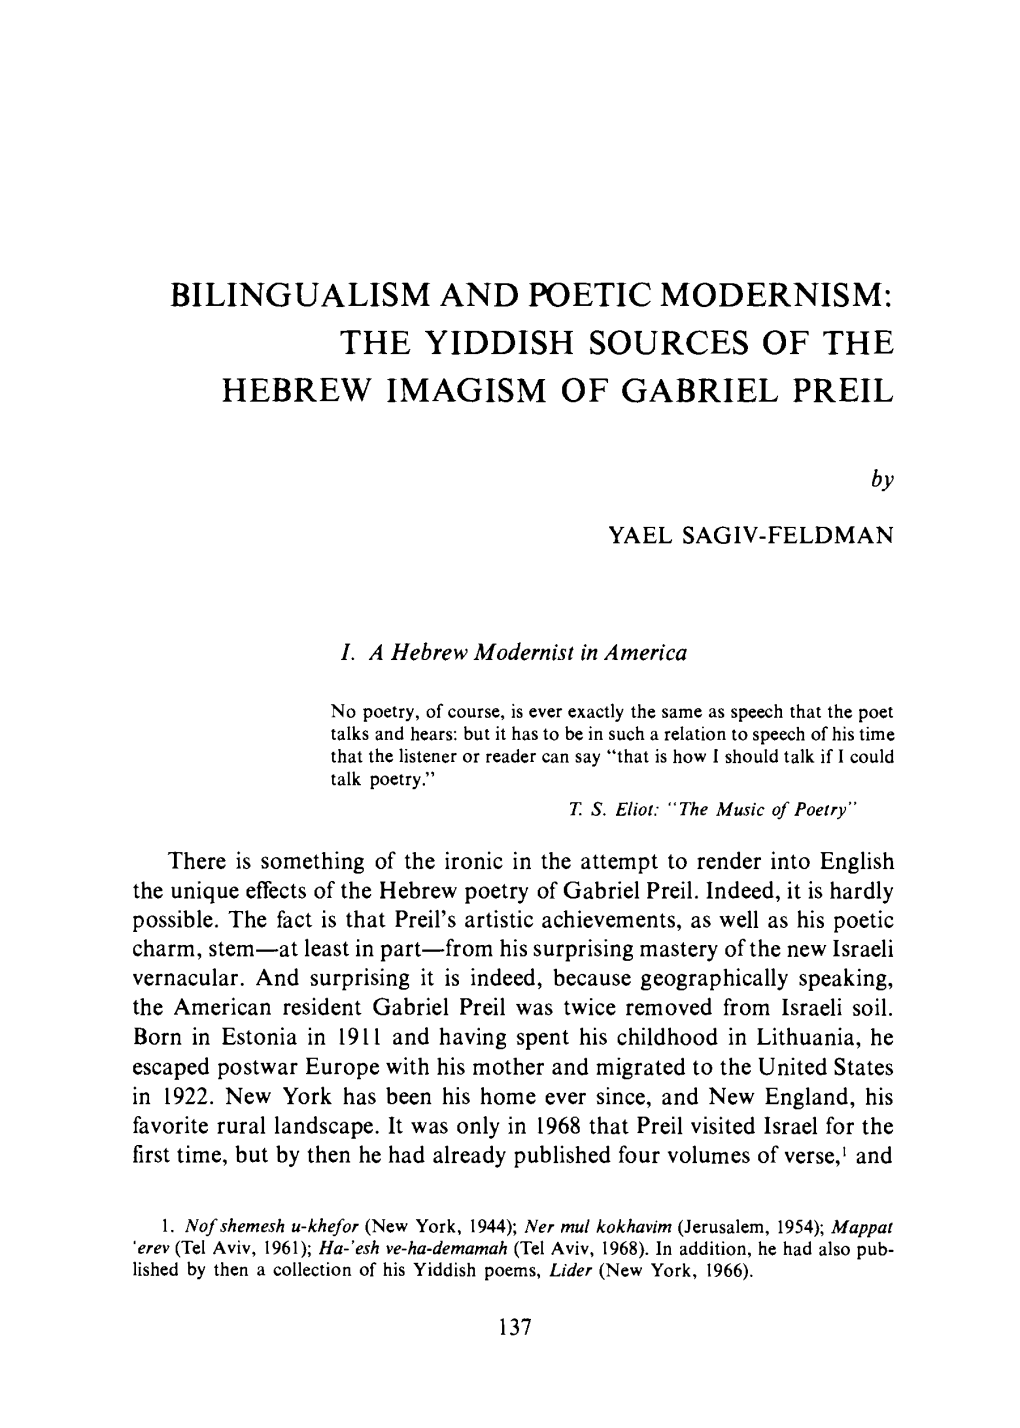 The Yiddish Sources of the Hebrew Imagism of Gabriel Preil